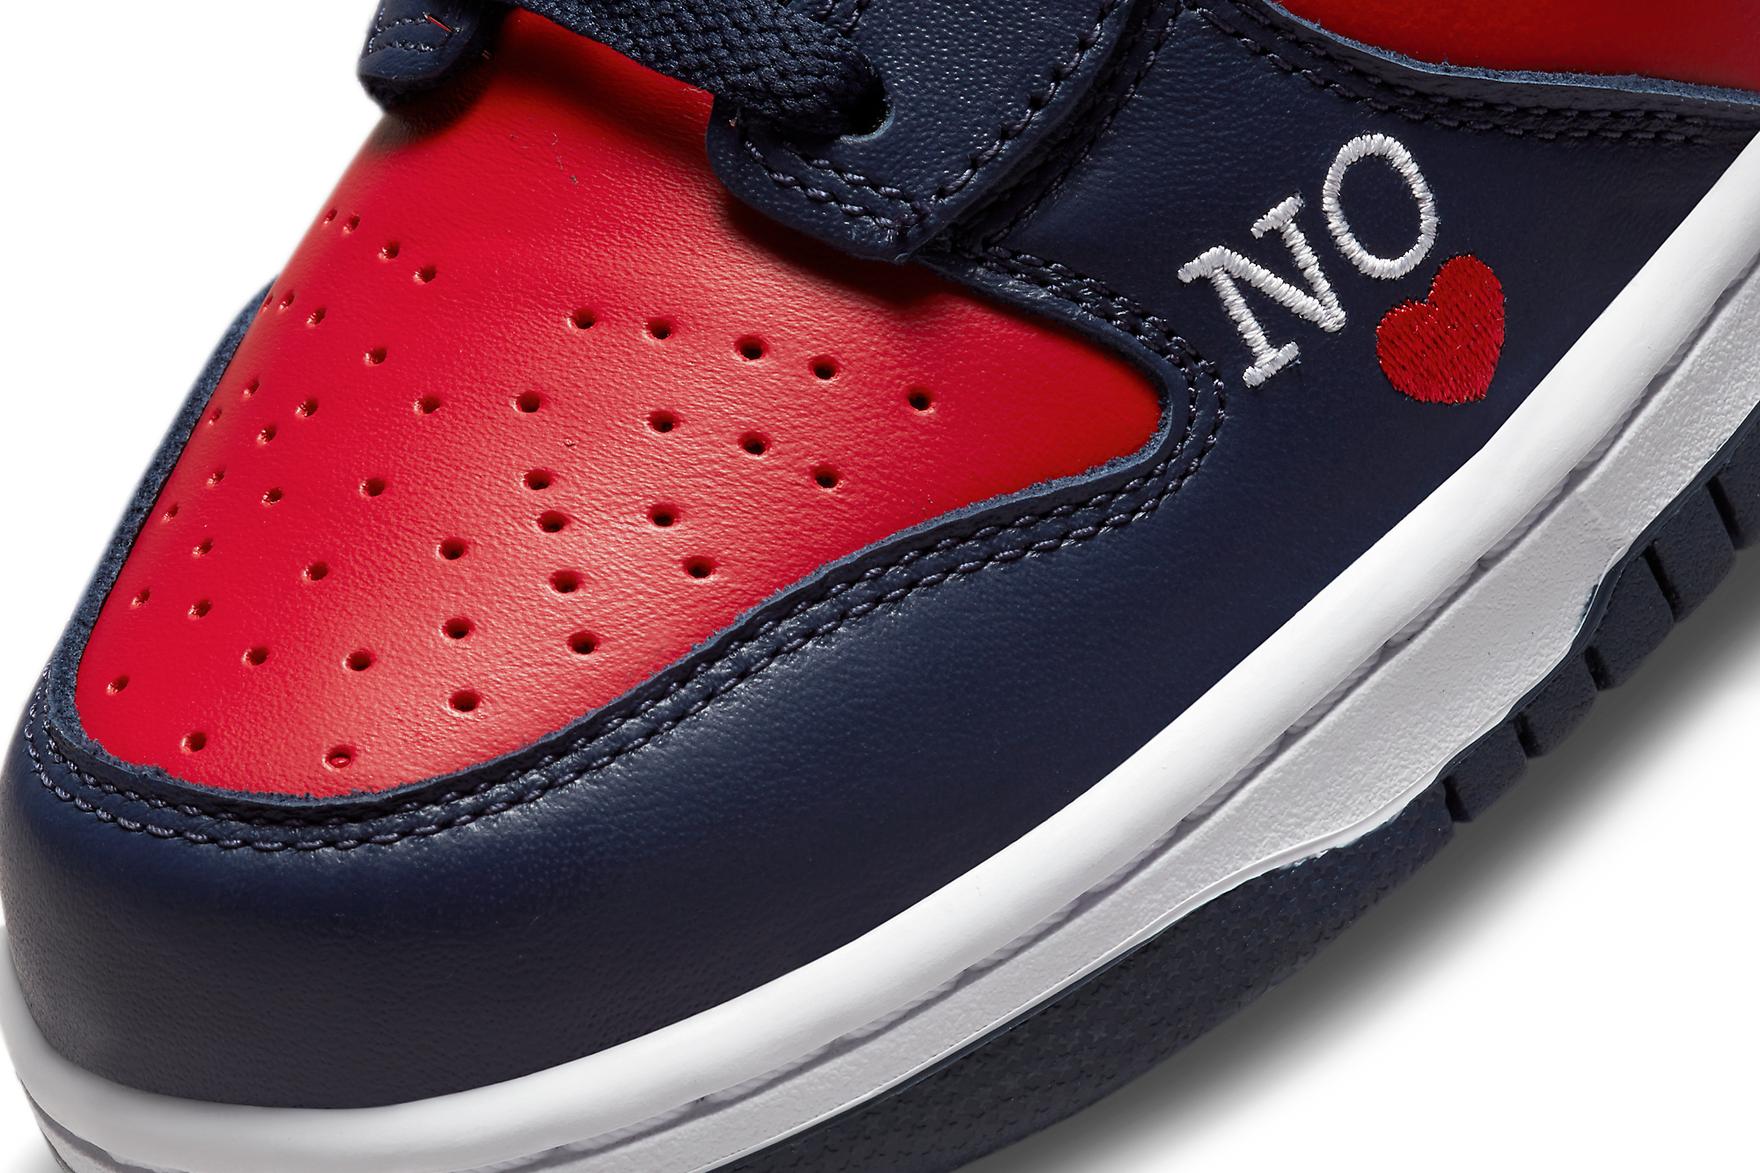 Supreme x Nike SB Dunk High 'By Any Means' in Navy/Red